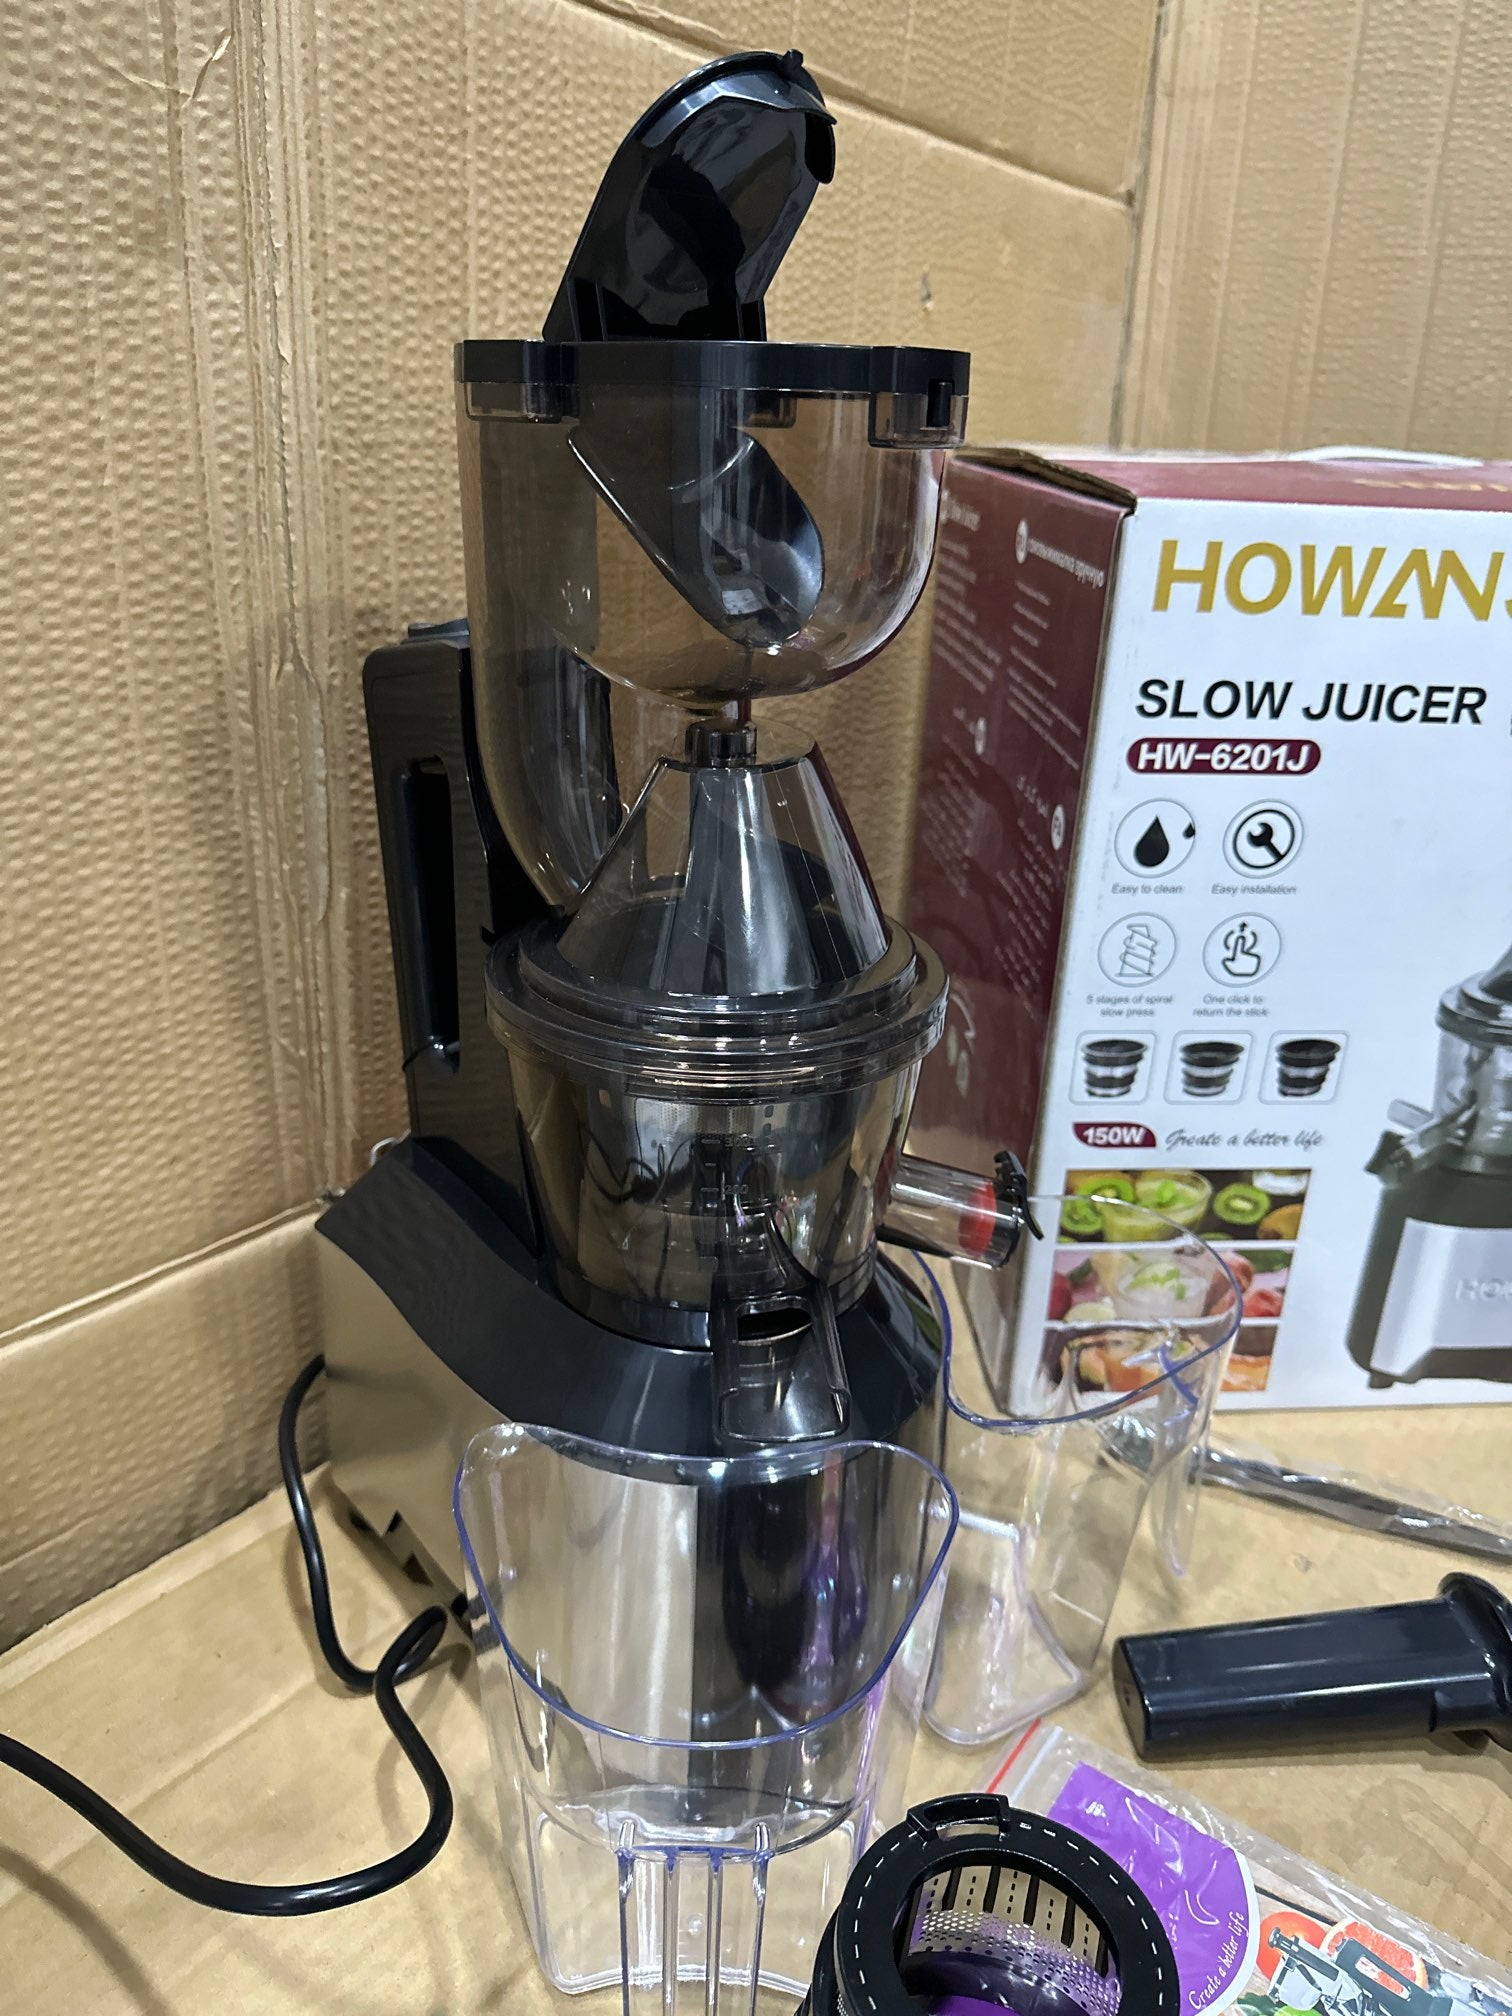 Lot imported Howans Slow juicer